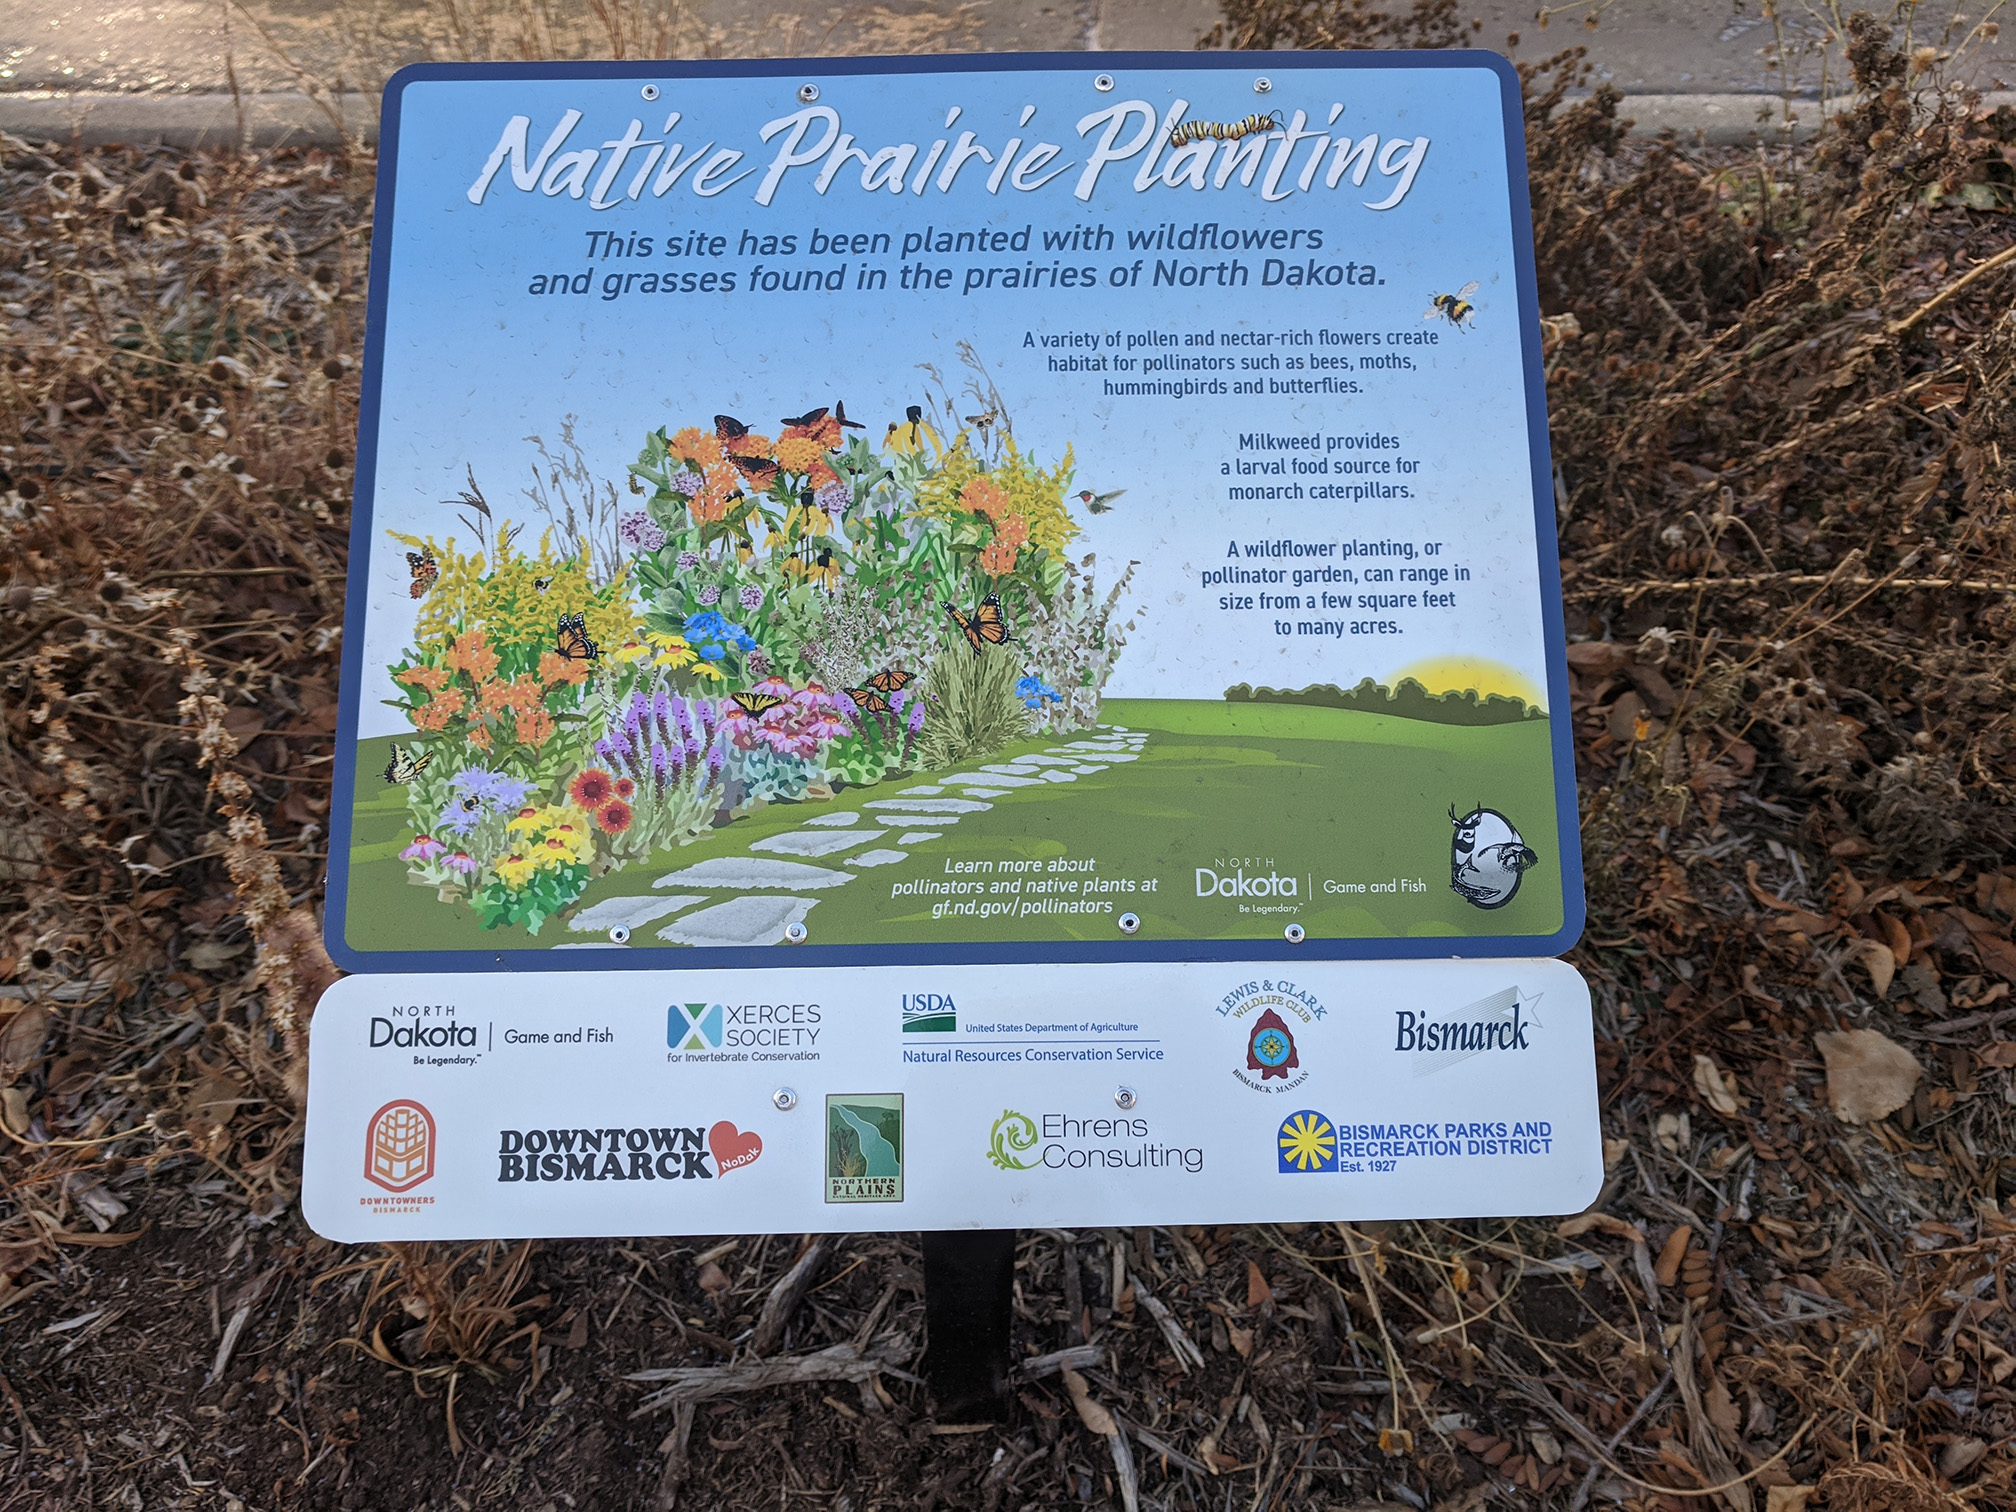 An information sign installed beside a flower planting. the sign is blue with a large illustration of a flower border full of orange, yellow, purple, and pink flowers.